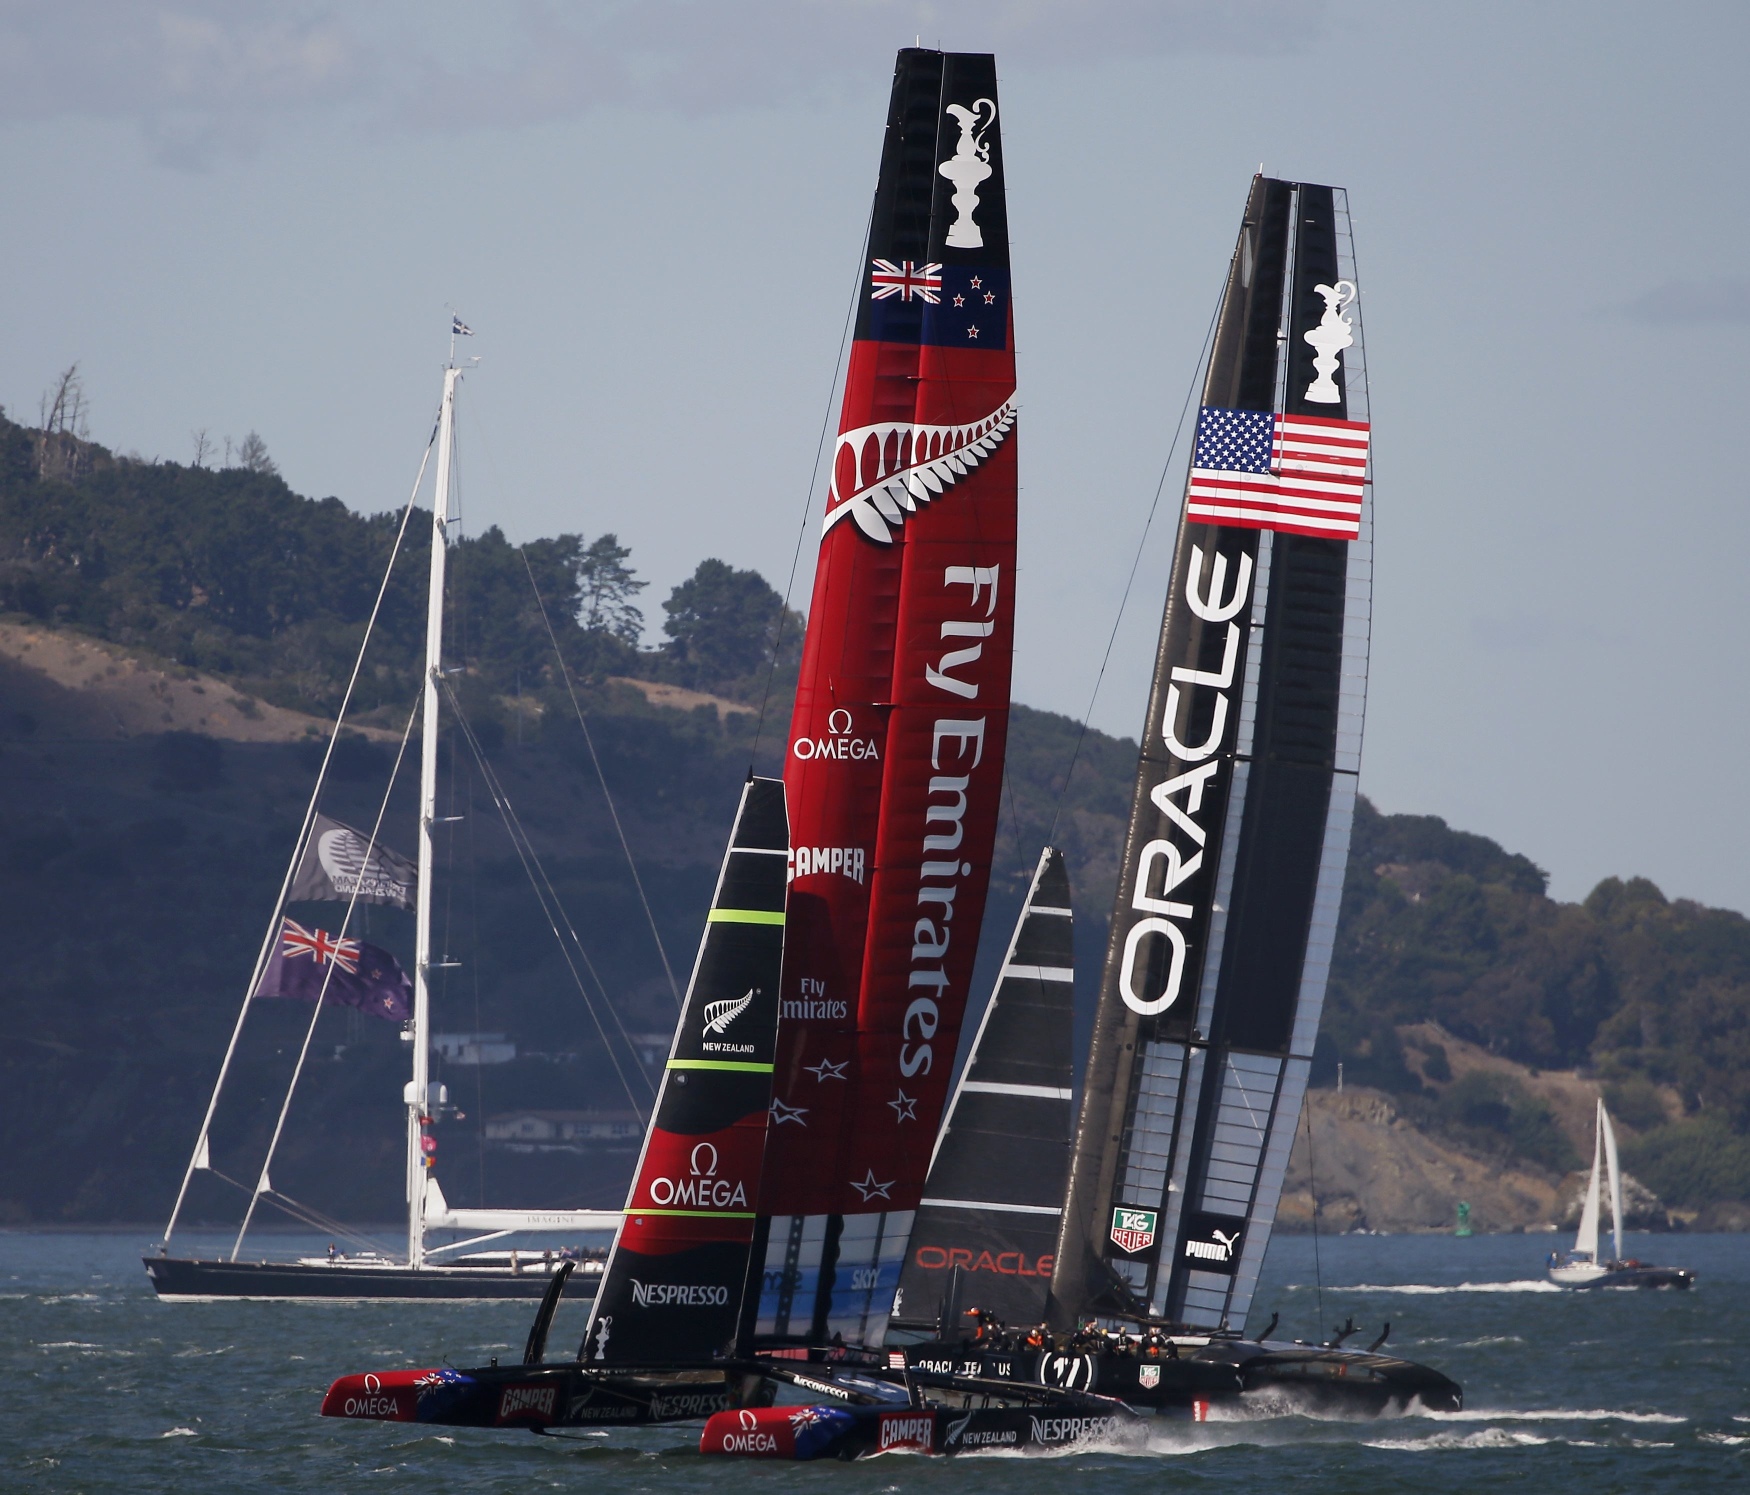 Emirates Team New Zealand sails against Oracle Team USA. New Zealand has ruled out any legal challenge to Oracle. Photo: Reuters